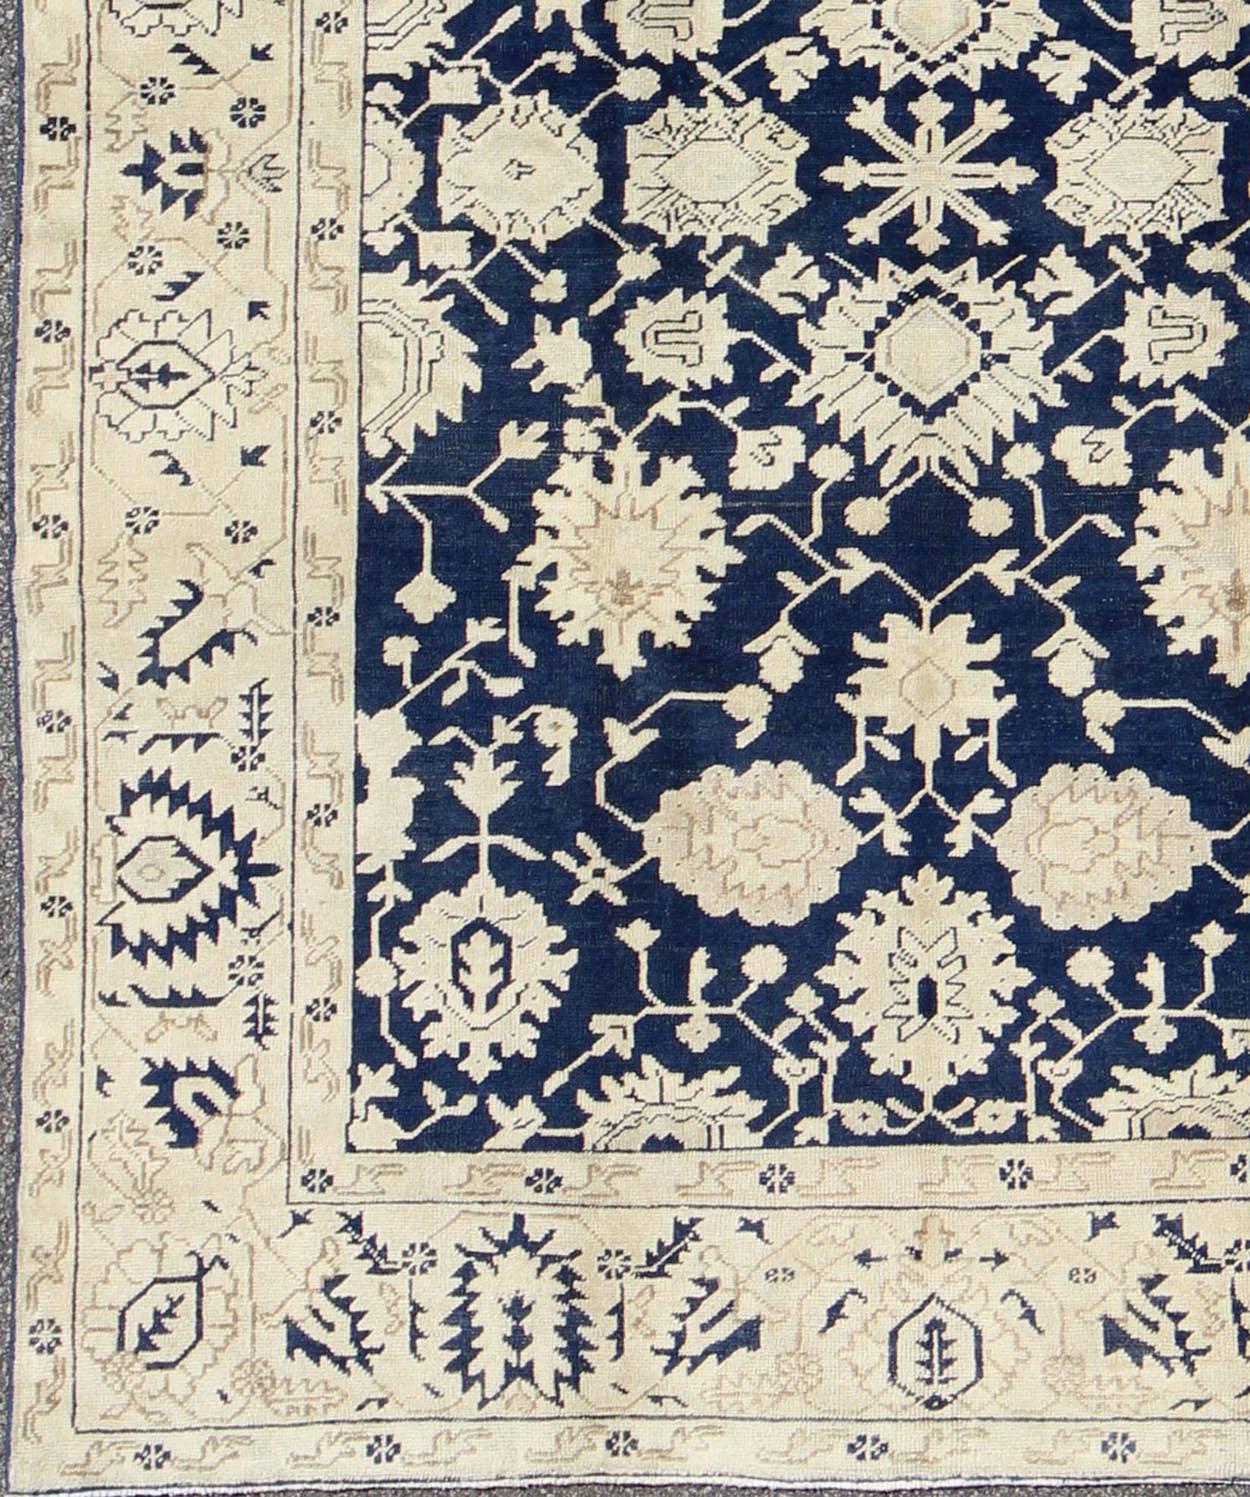 Unique Turkish Oushak Rug with all over Floral Design in Dark Blue, Cream and Light Brown rug/TU-MTU-3610
This unique Oushak rug features all-over geometric and floral abstractions, serrated leaves, and arabesques on a navy blue field. Angular